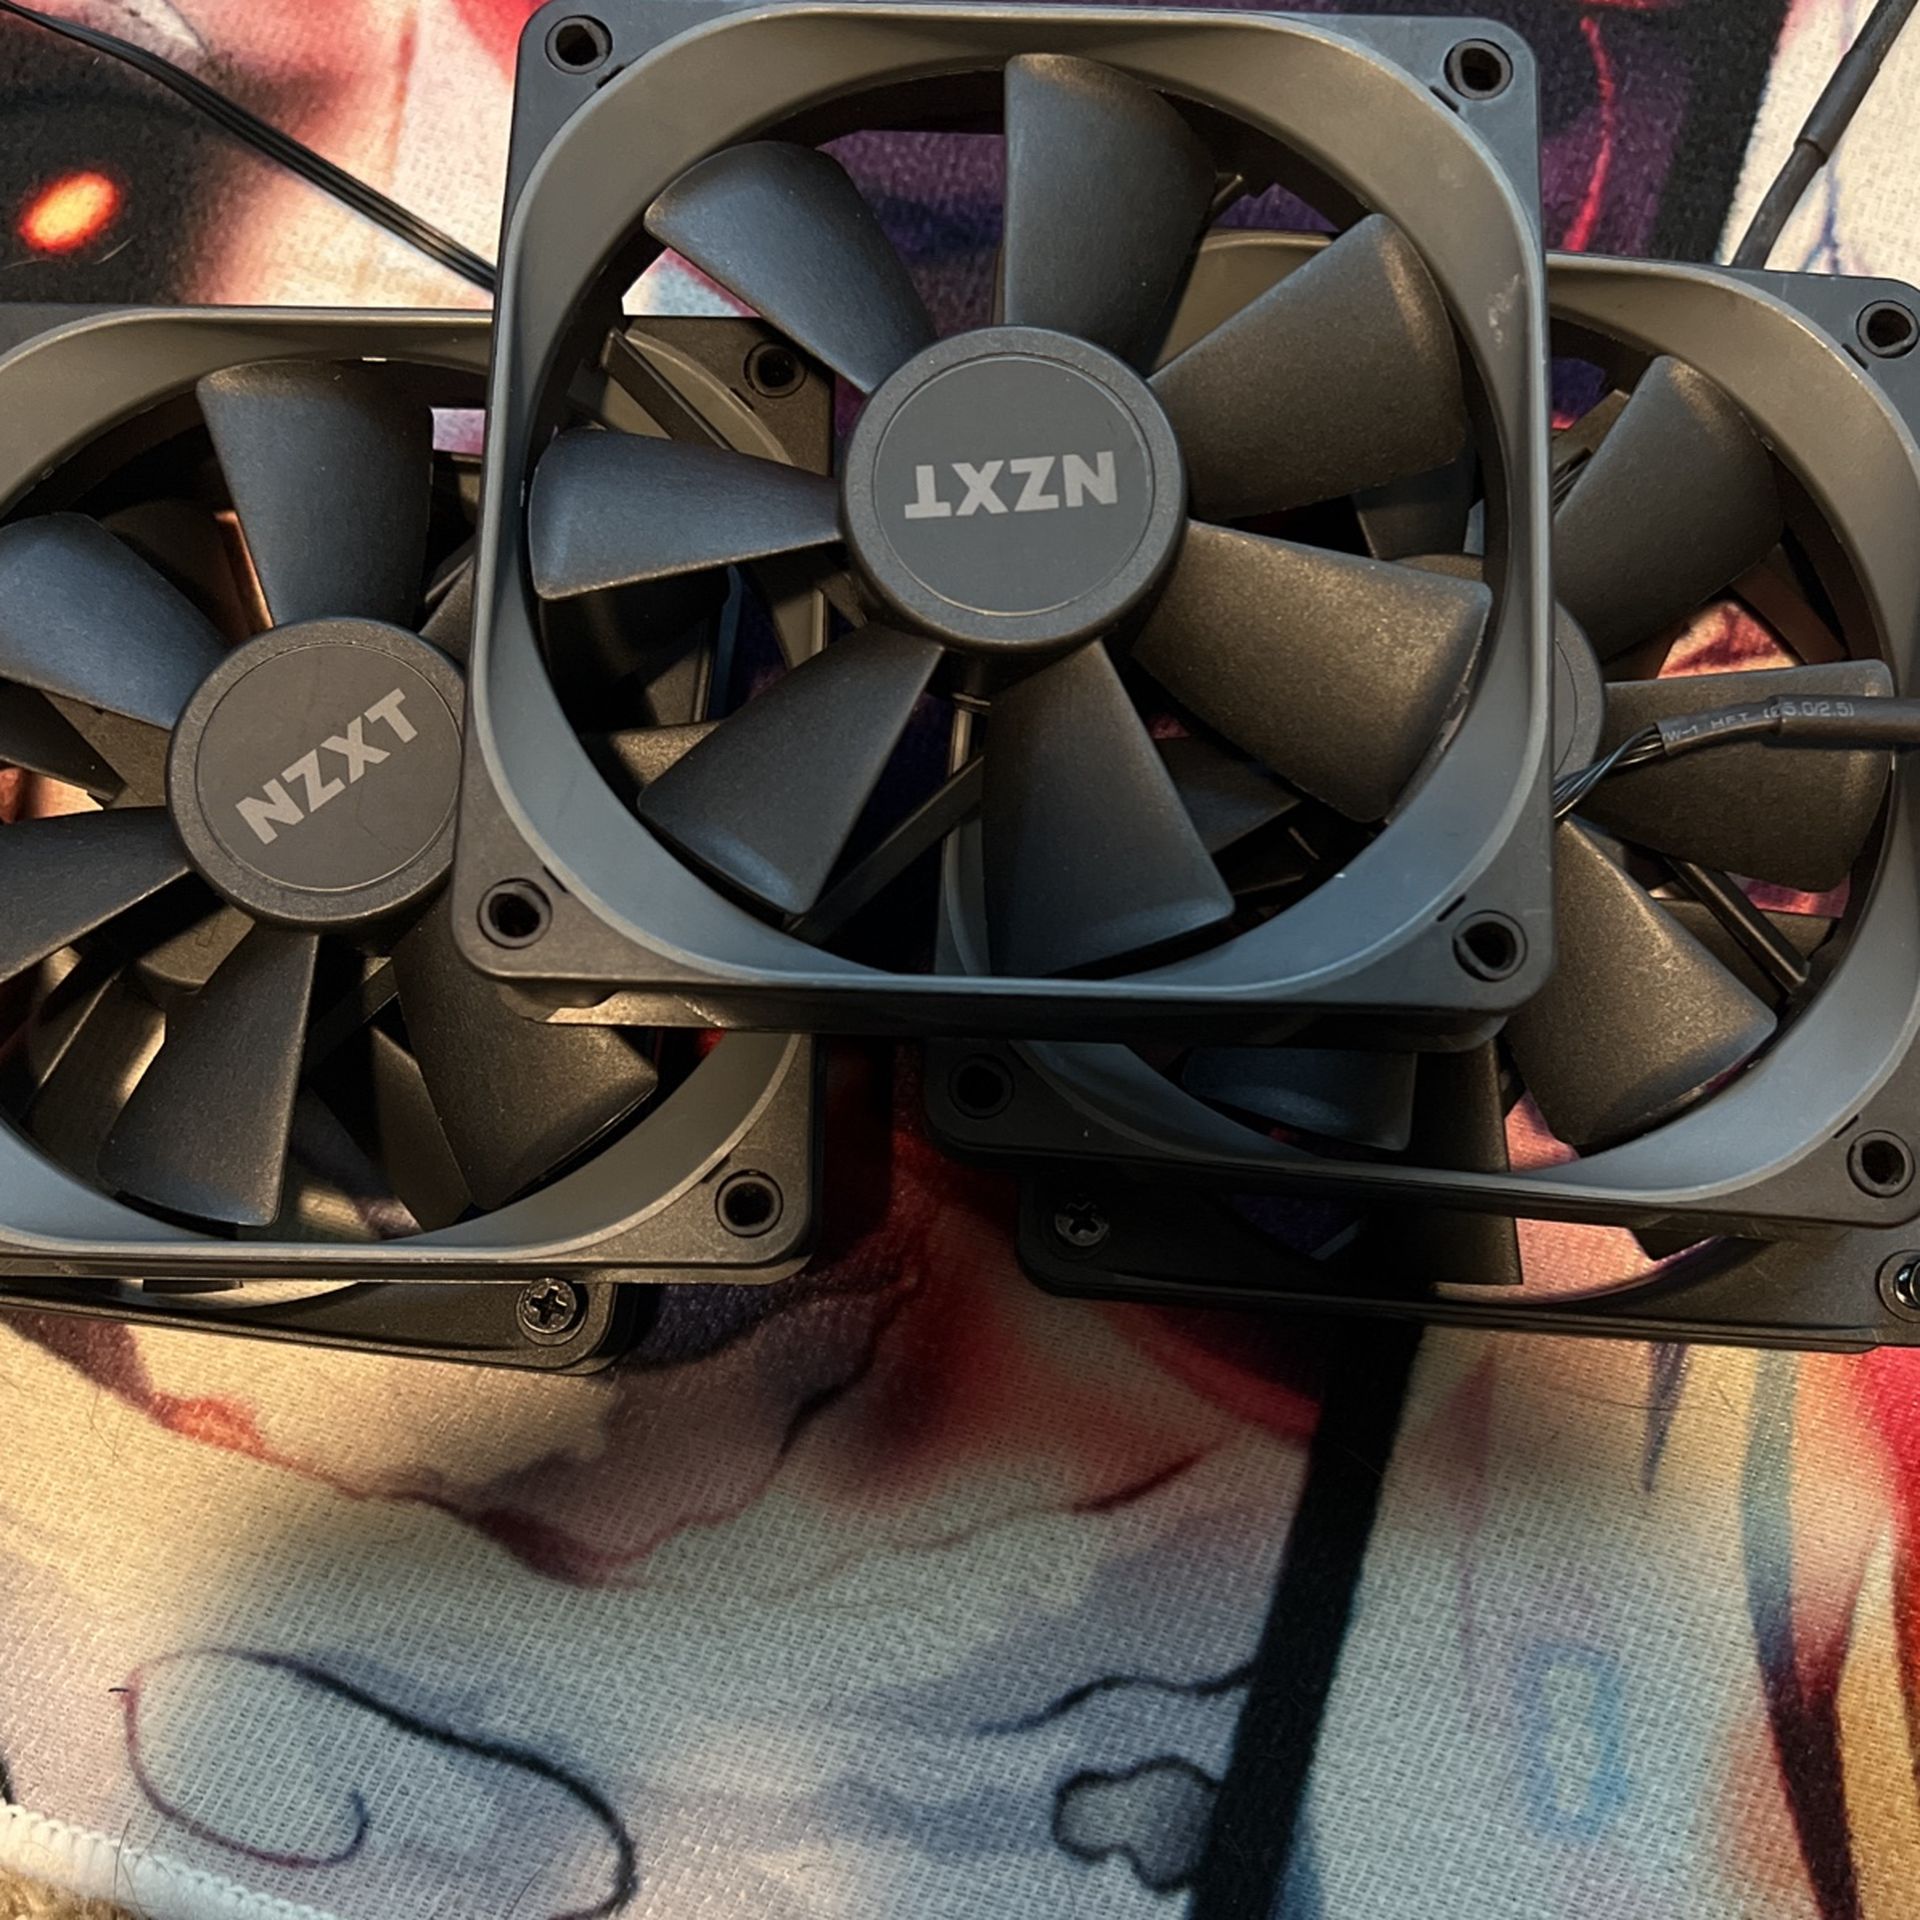 5 NZXT and 1 Be quiet 120mm computer Fans 